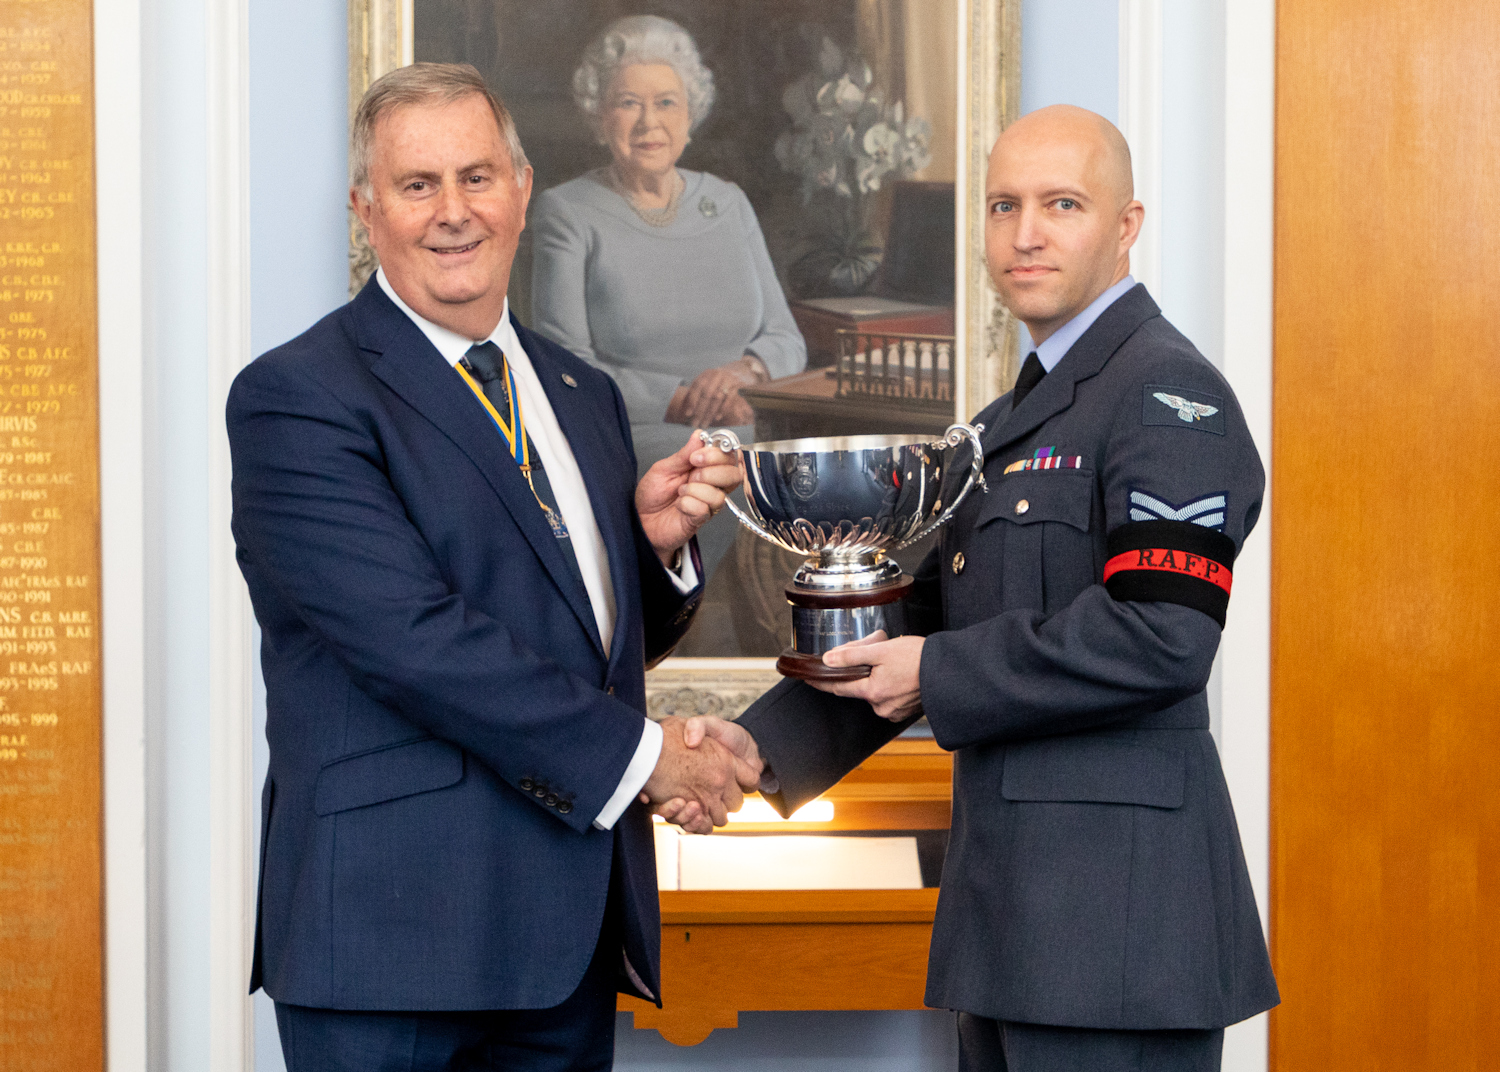 Past Master Michael Barley,WCoSP presenting the WCoSP Securing the Sky award to Sergeant Sibley